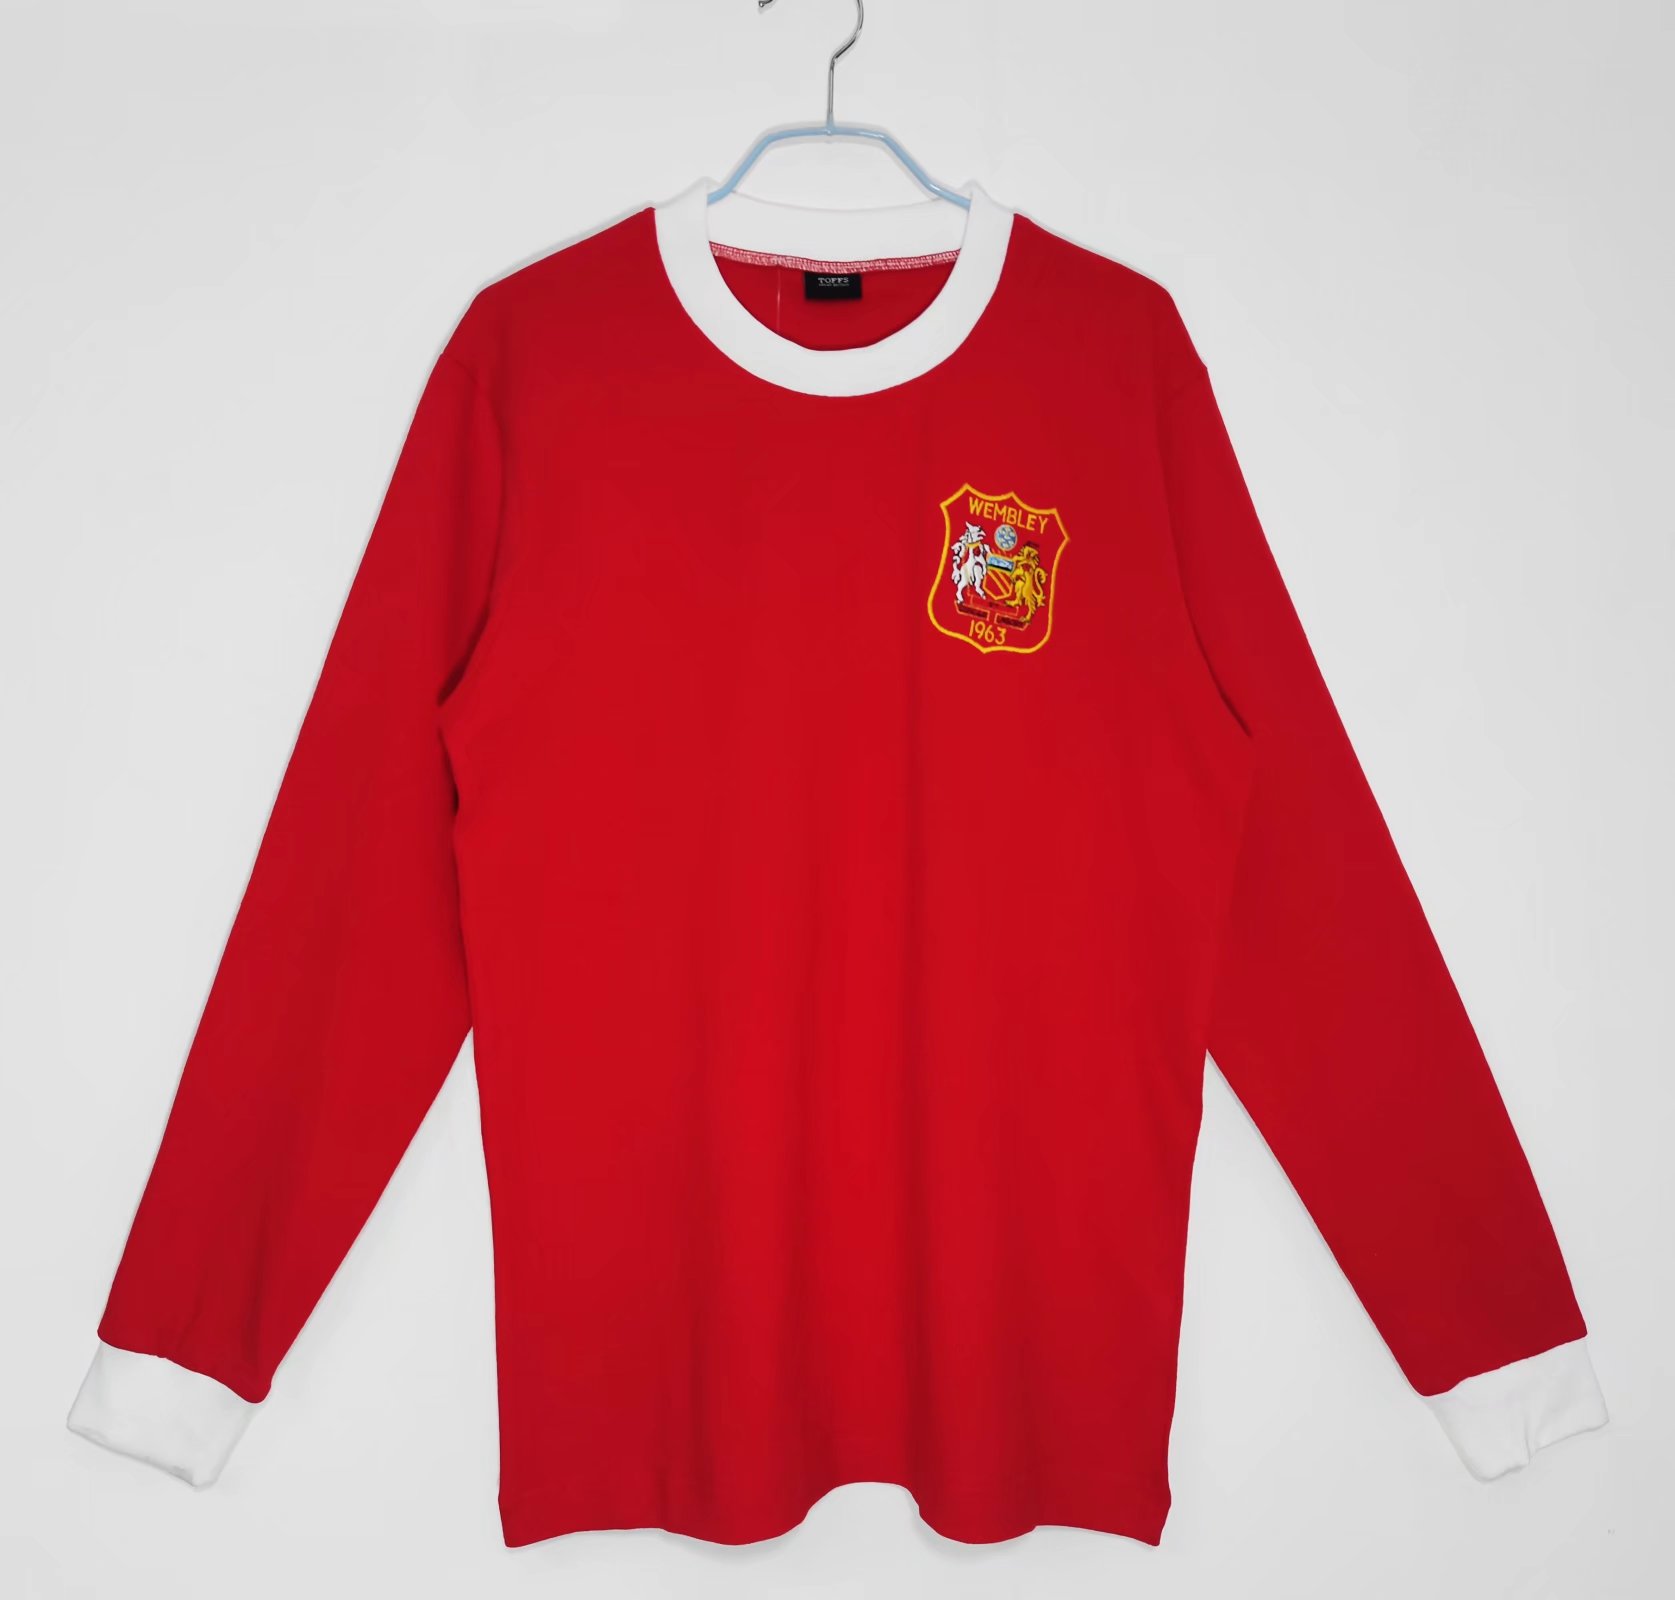 1963 Manchester United Long sleeves Retro